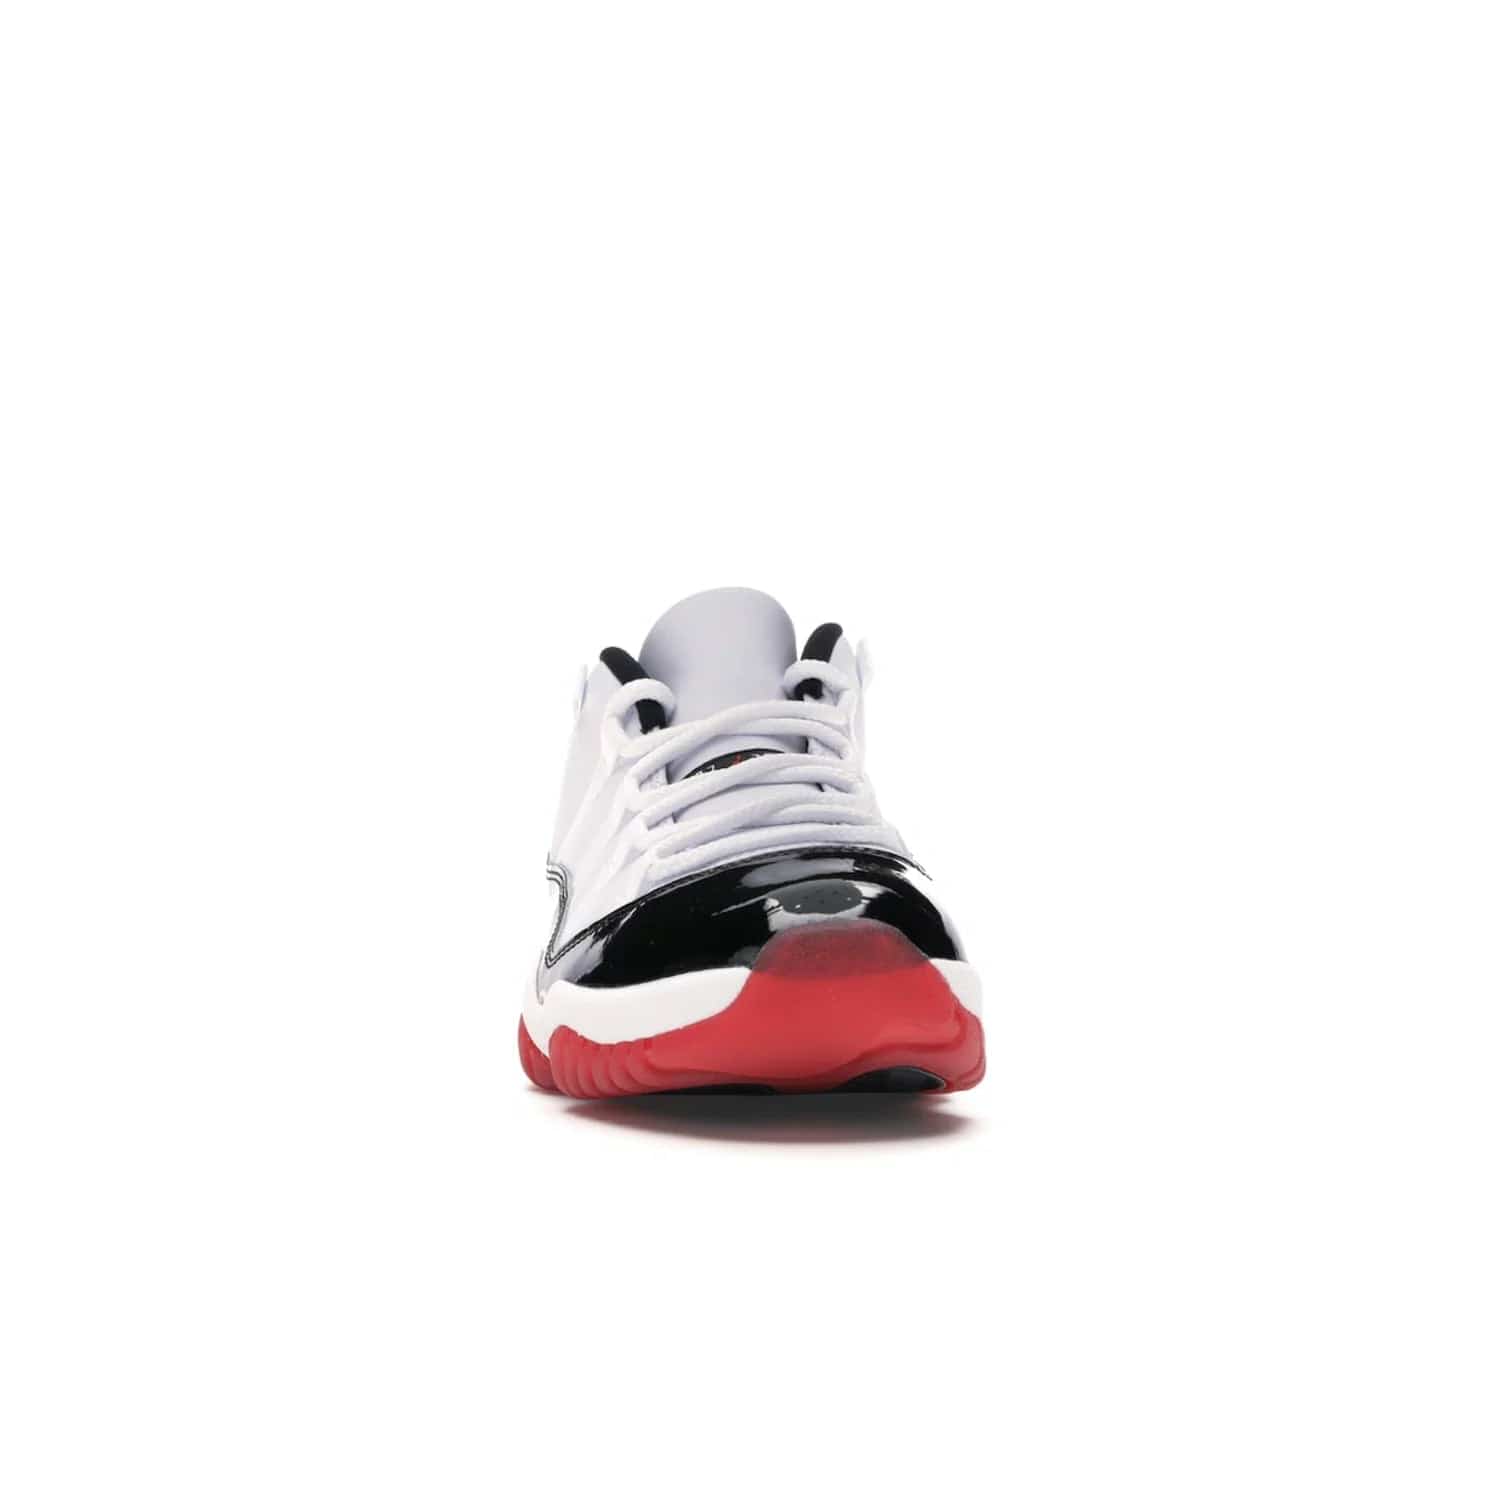 Jordan 11 Retro Low Concord Bred - Image 9 - Only at www.BallersClubKickz.com - Grab the classic Jordan 11 look with the Jordan 11 Retro Low Concord Bred. With white and black elements and the iconic red outsole of the Jordan 11 Bred, you won't miss a beat. Released in June 2020, the perfect complement to any outfit.